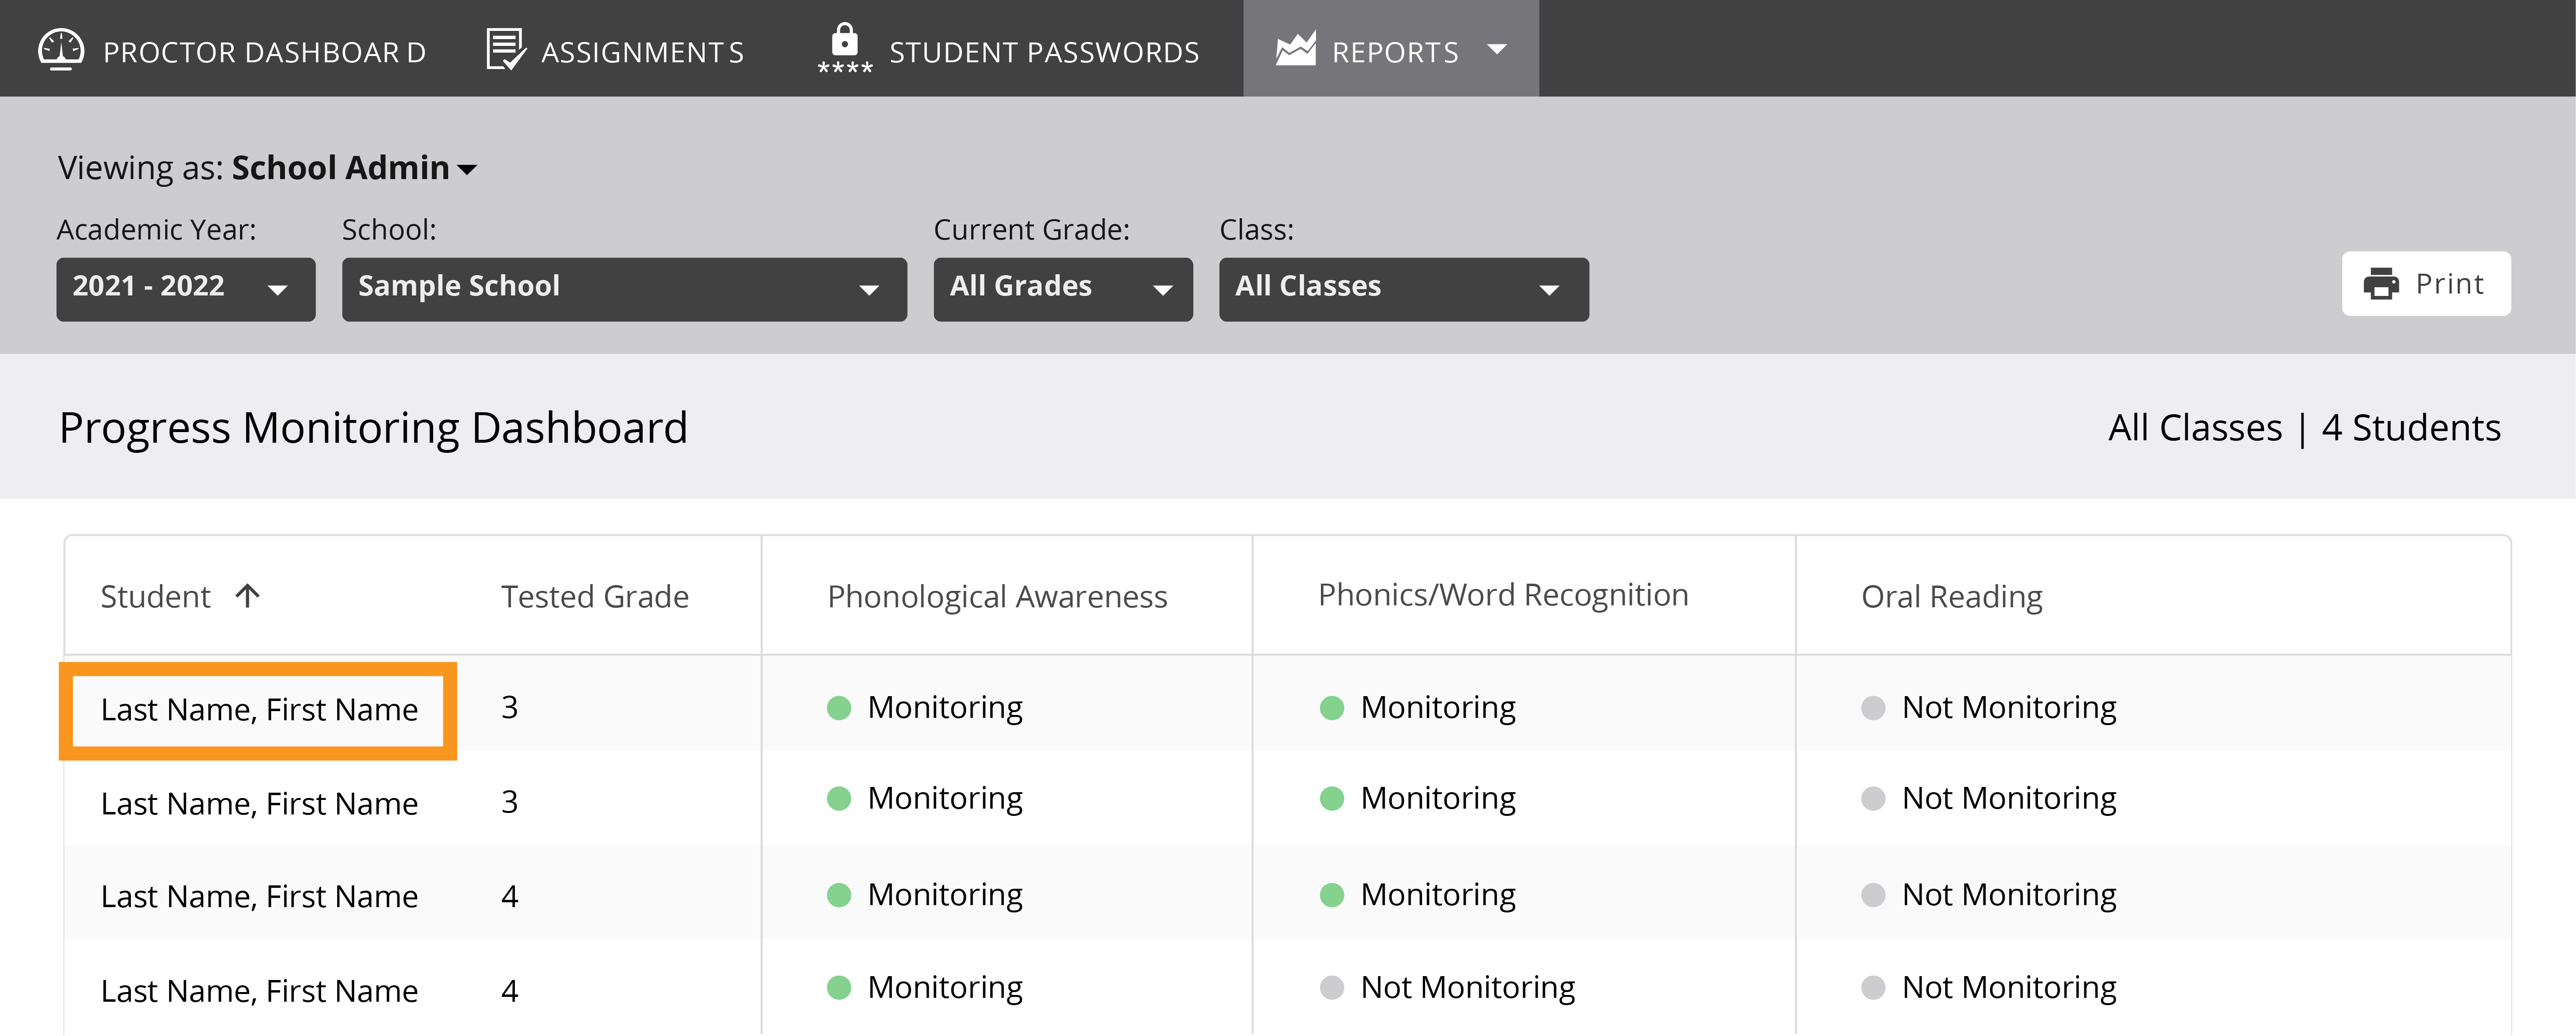 A student’s name highlighted on the Progress Monitoring Dashboard